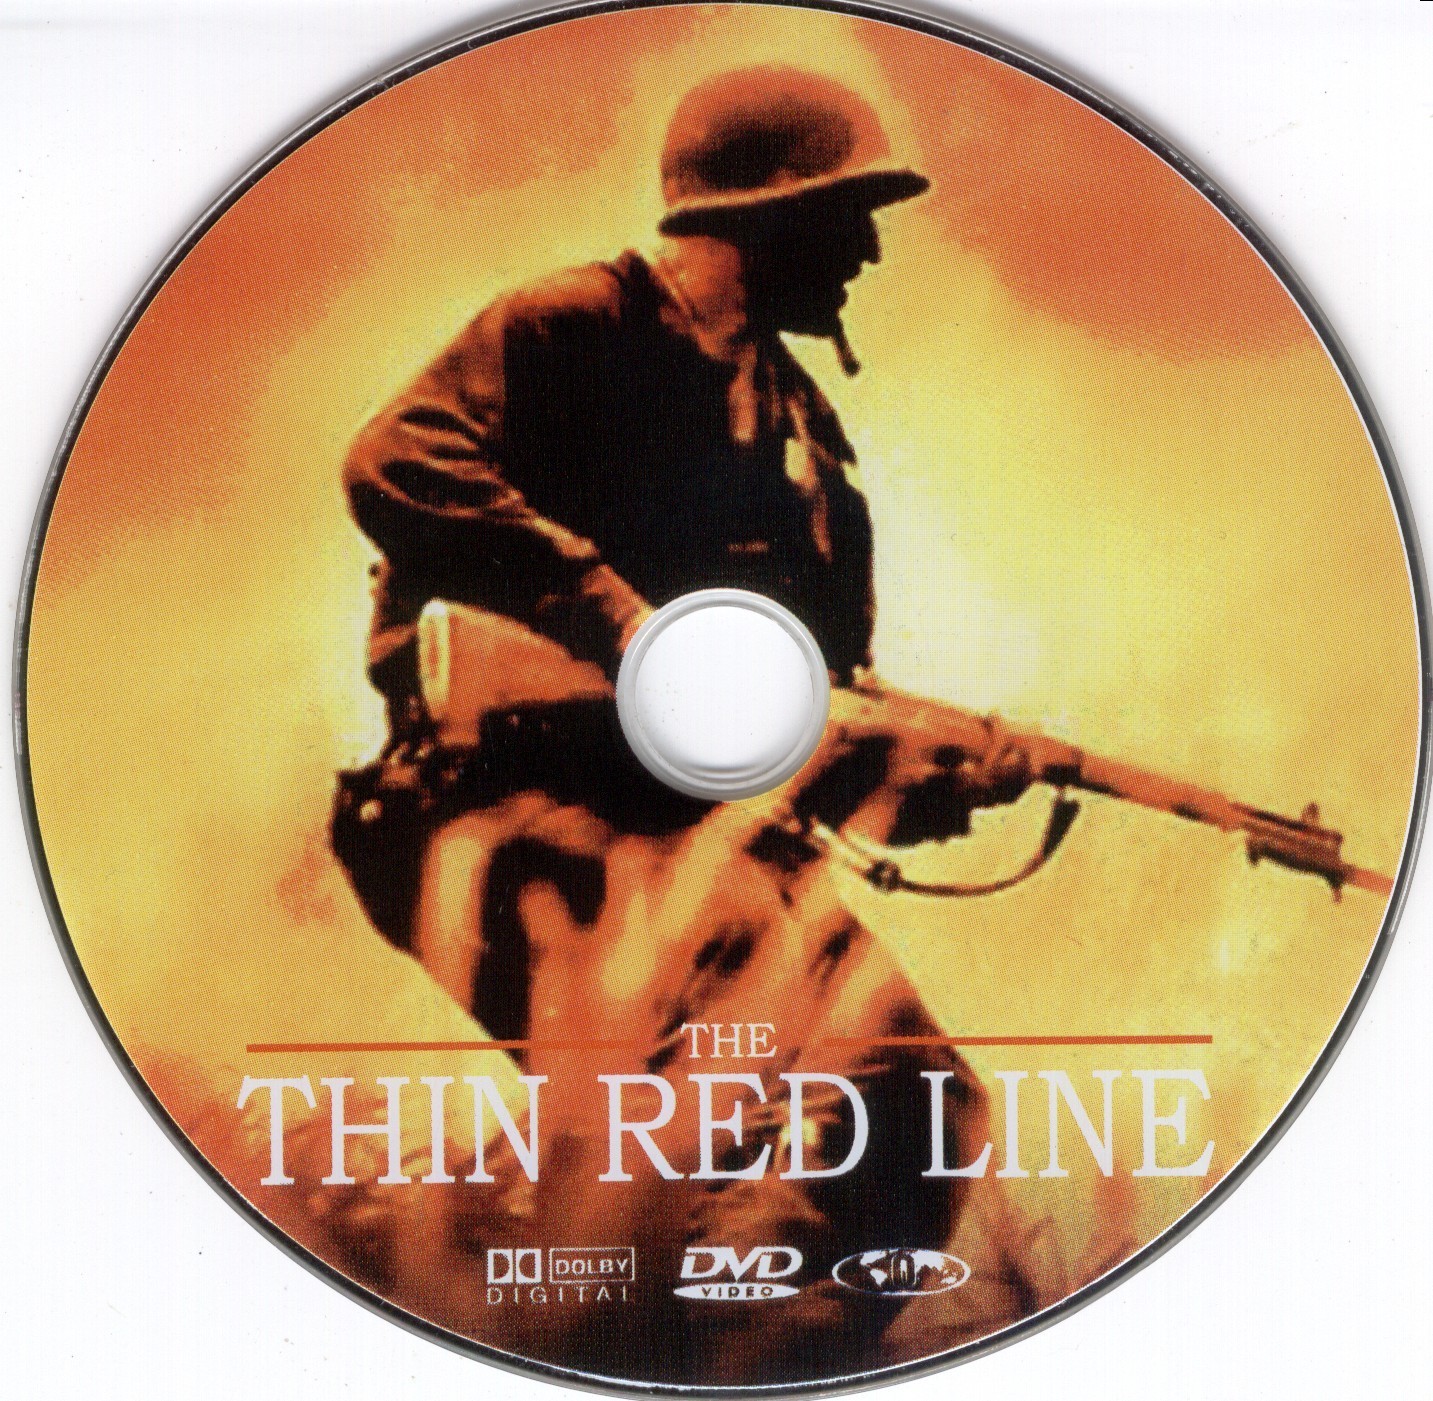 Tin red line 1998